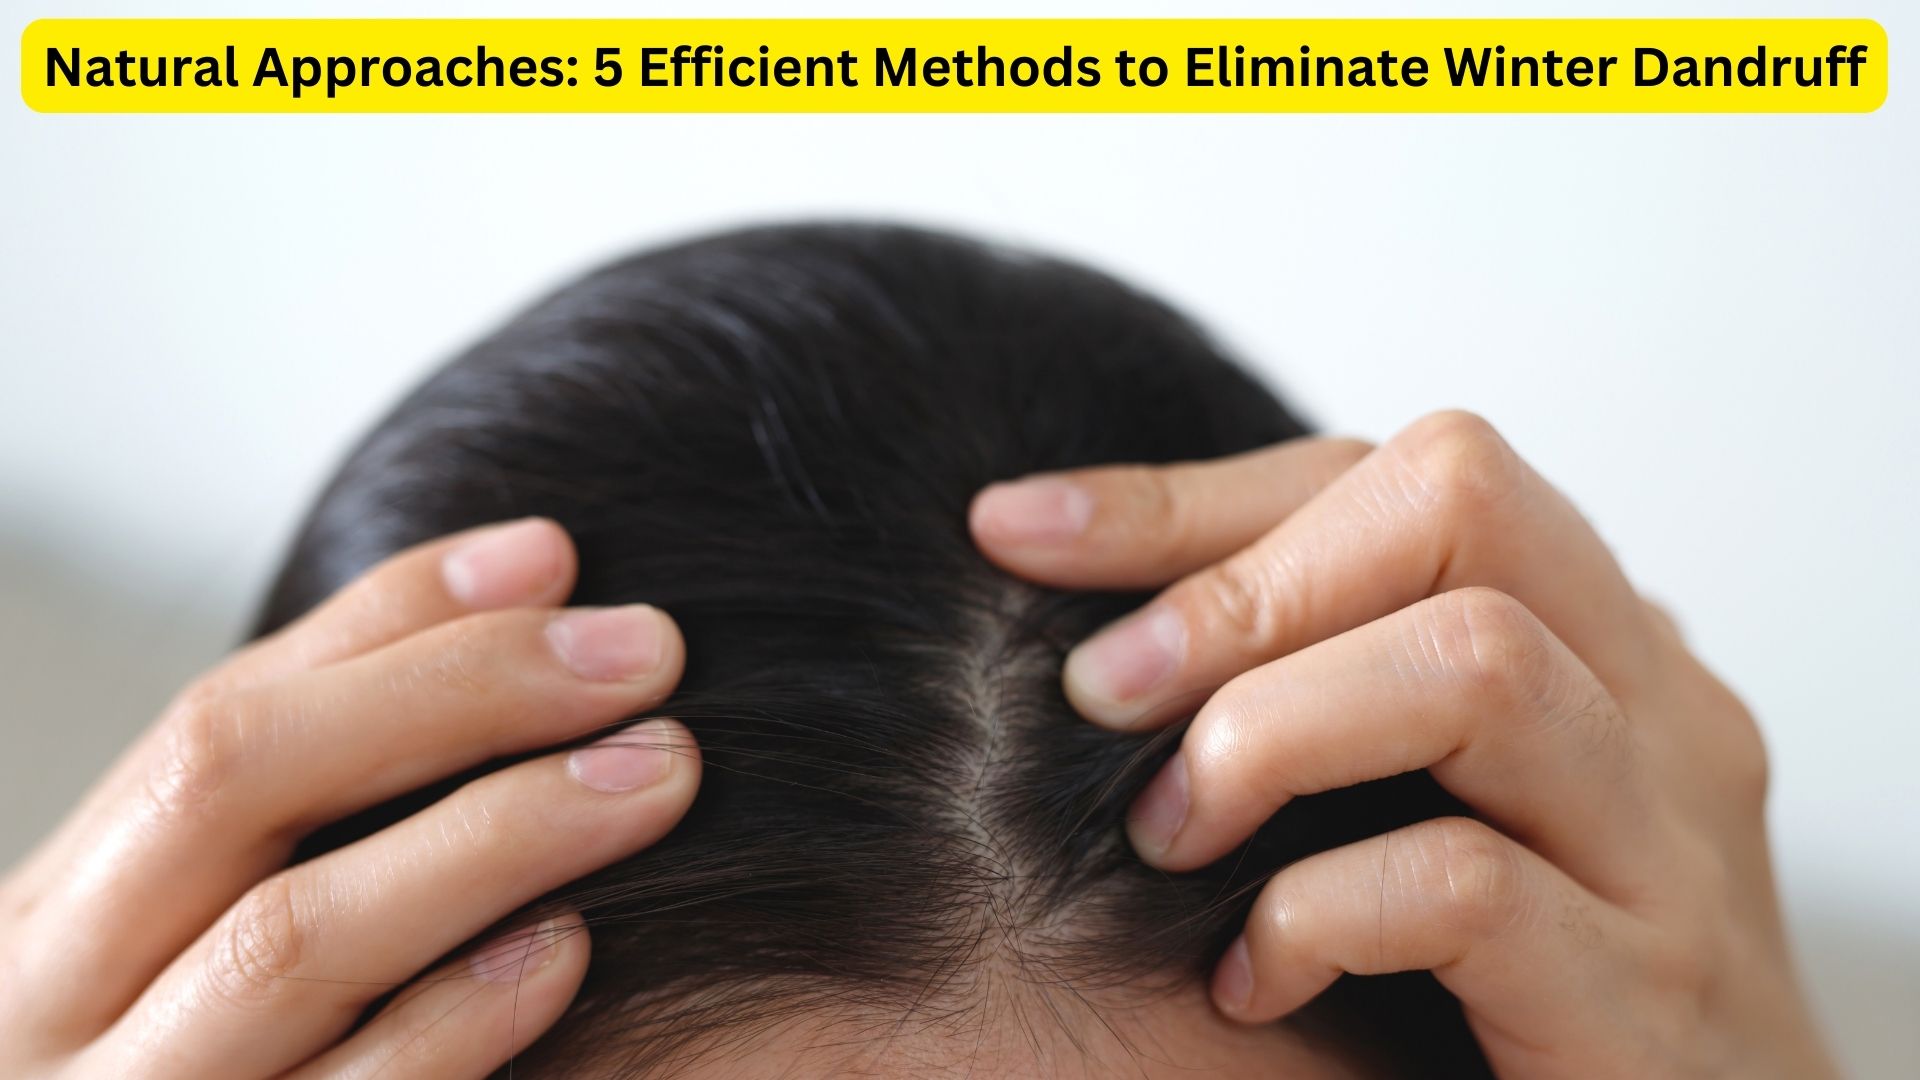 Natural Approaches: 5 Efficient Methods to Eliminate Winter Dandruff